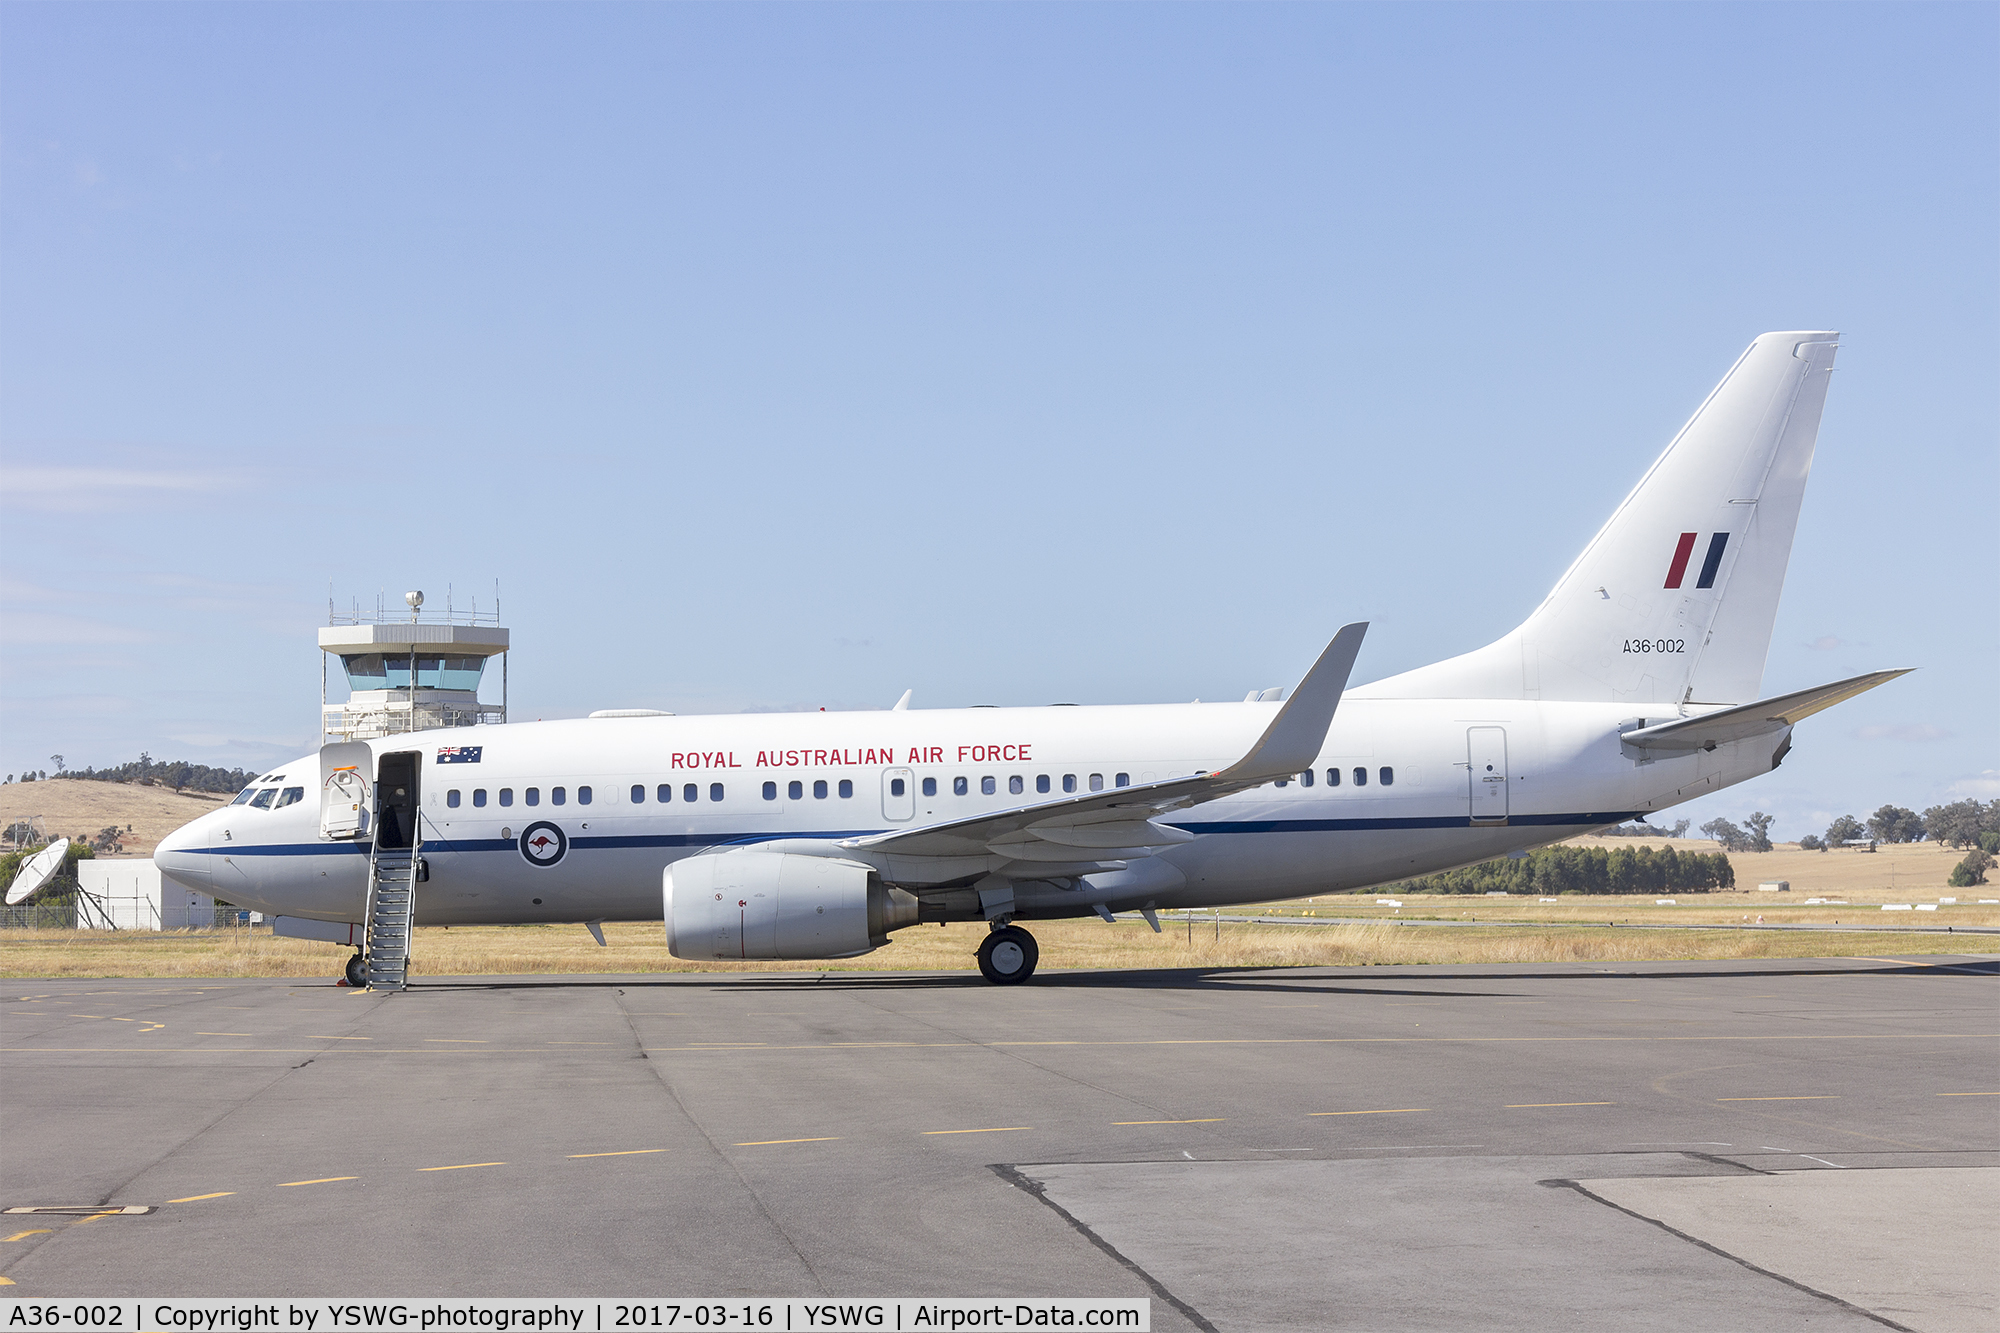 A36-002, 2000 Boeing 737-7DF C/N 30790/613, Royal Australian Air Force (A36-002) Boeing 737-7DT (BBJ) at Wagga Wagga Airport.